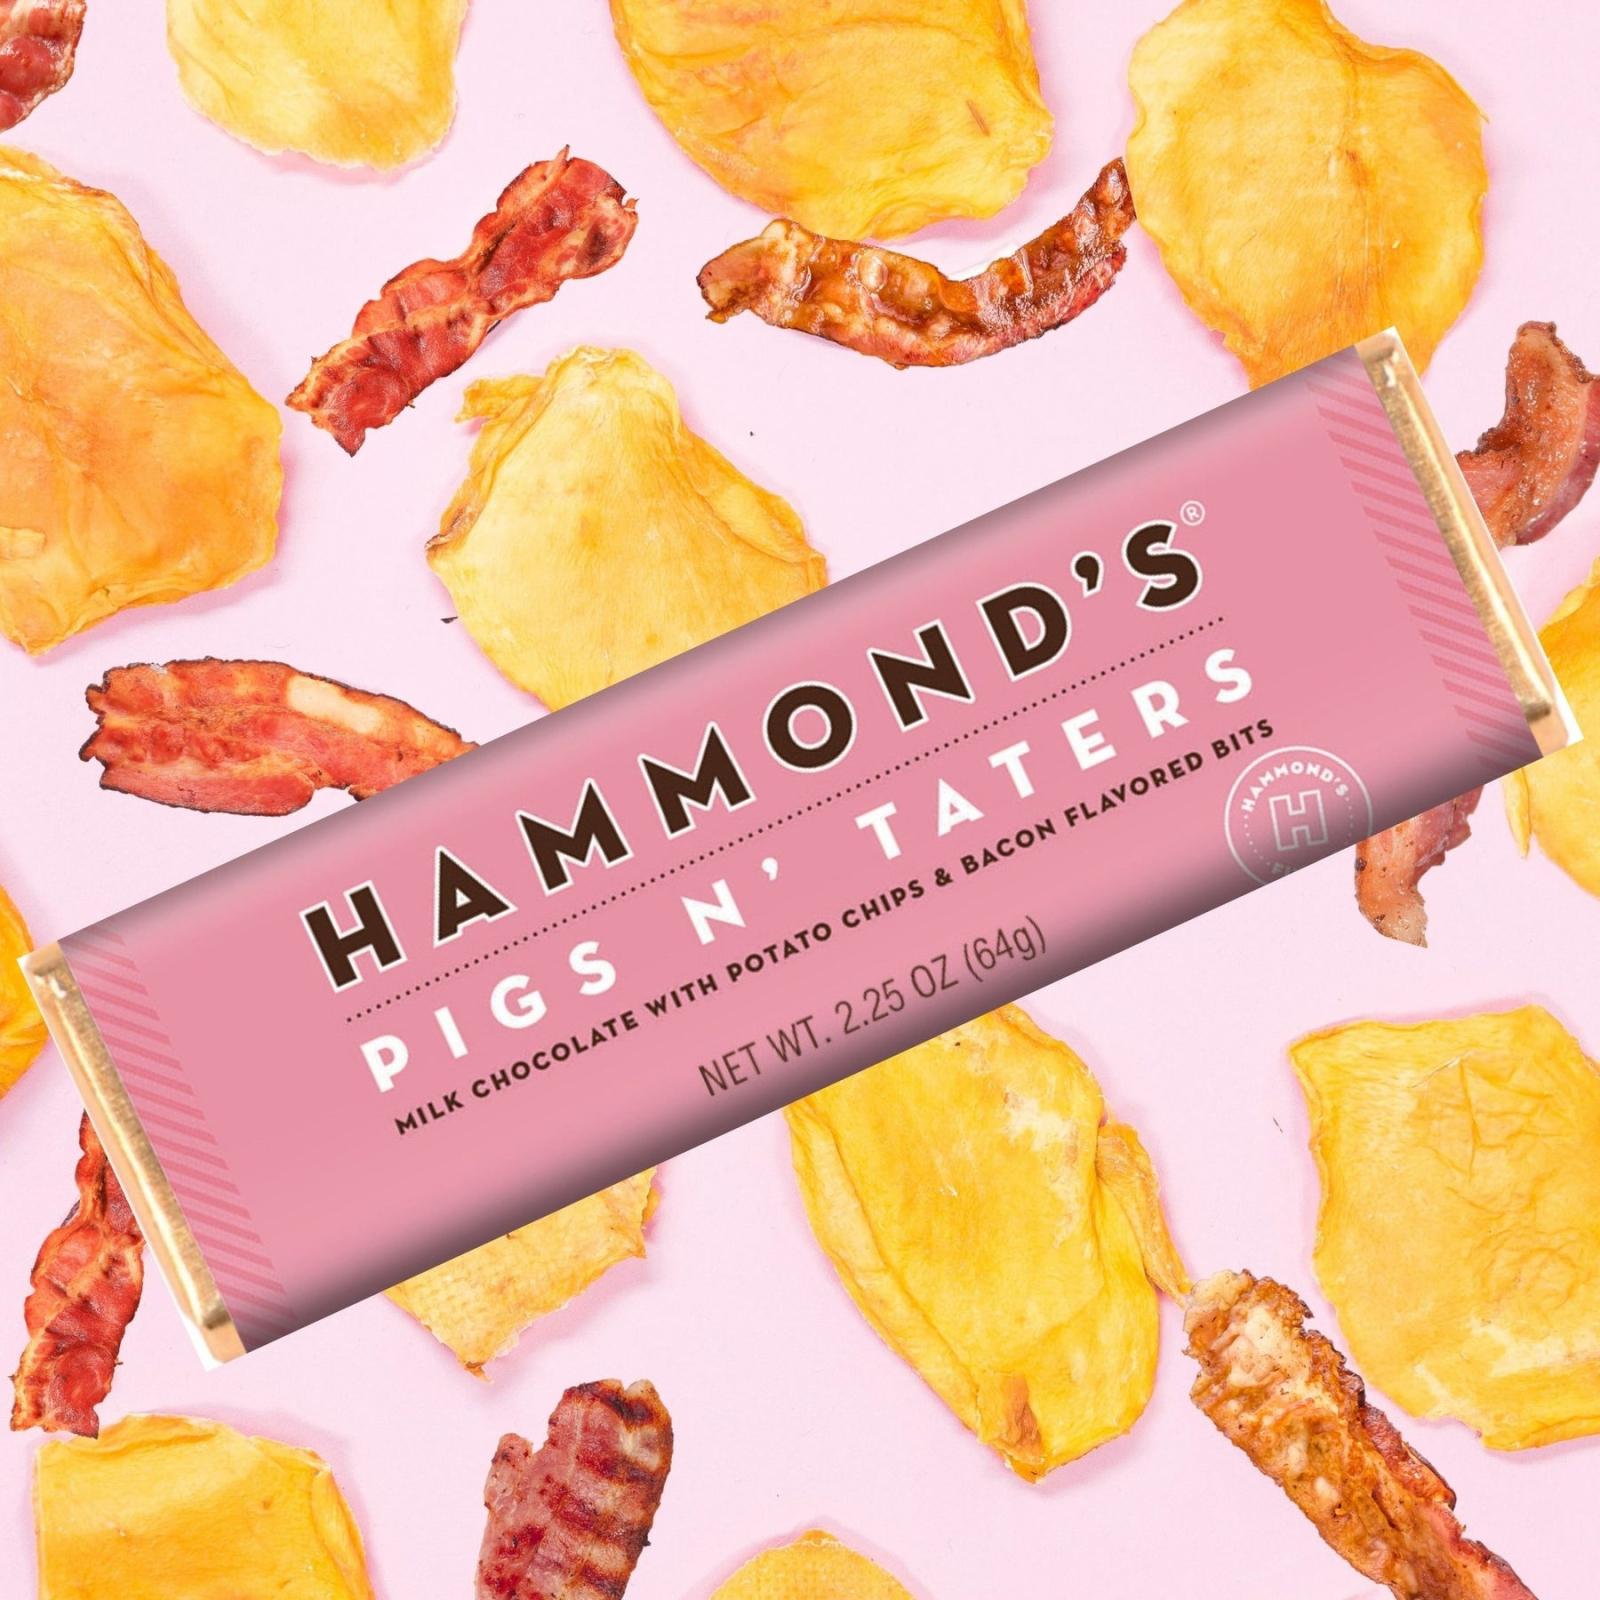 Hammond's Candies Pigs N' Taters Milk Chocolate Candy Bars